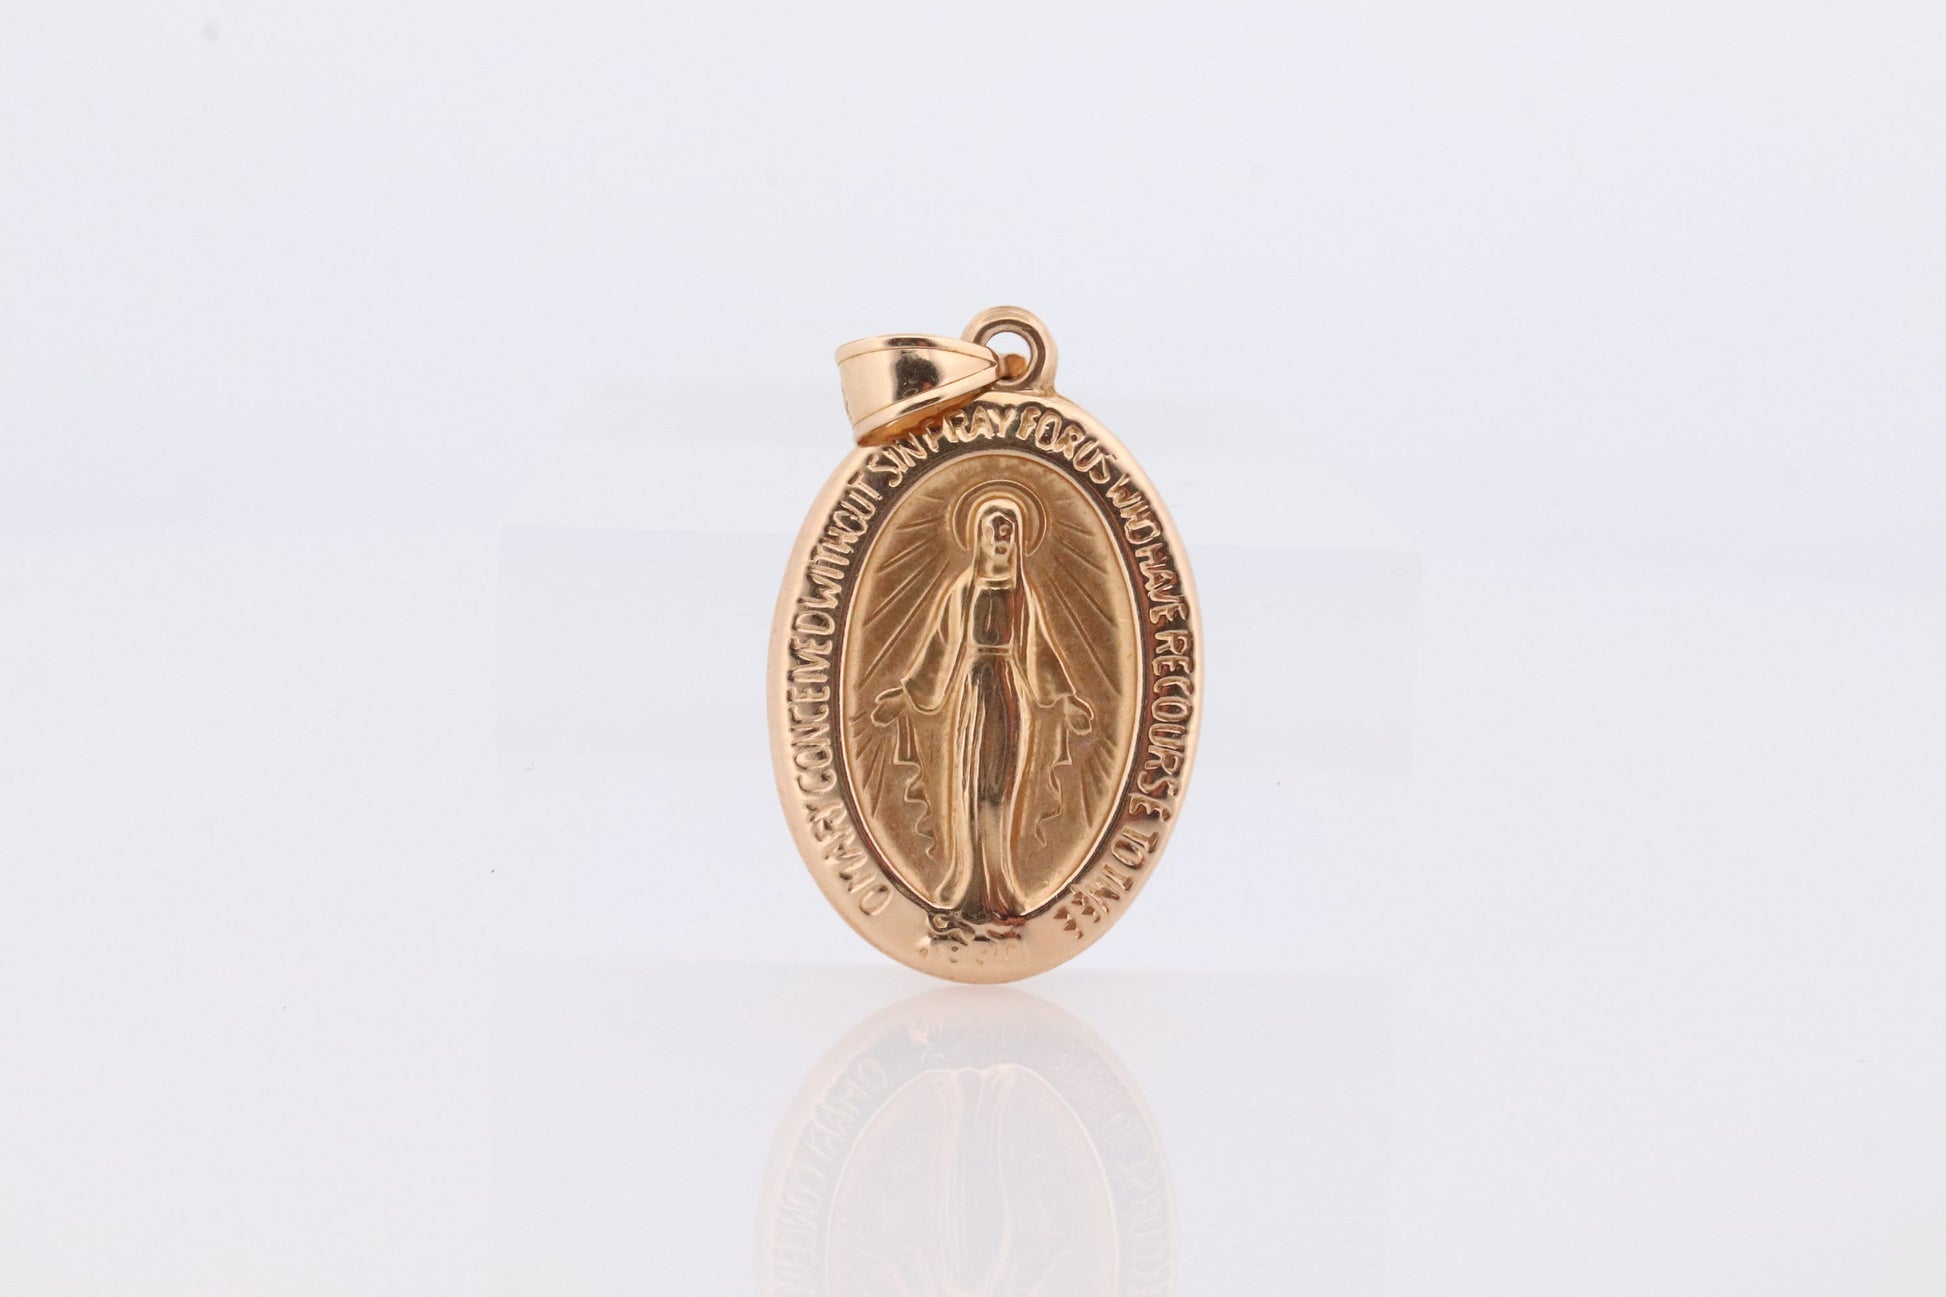 Vintage 14k Yellow Gold Pendant. Marian Cross. Madonna Pendant. VIRGIN Mary Pendant. Mother Medallion for Necklace or Medal st92(